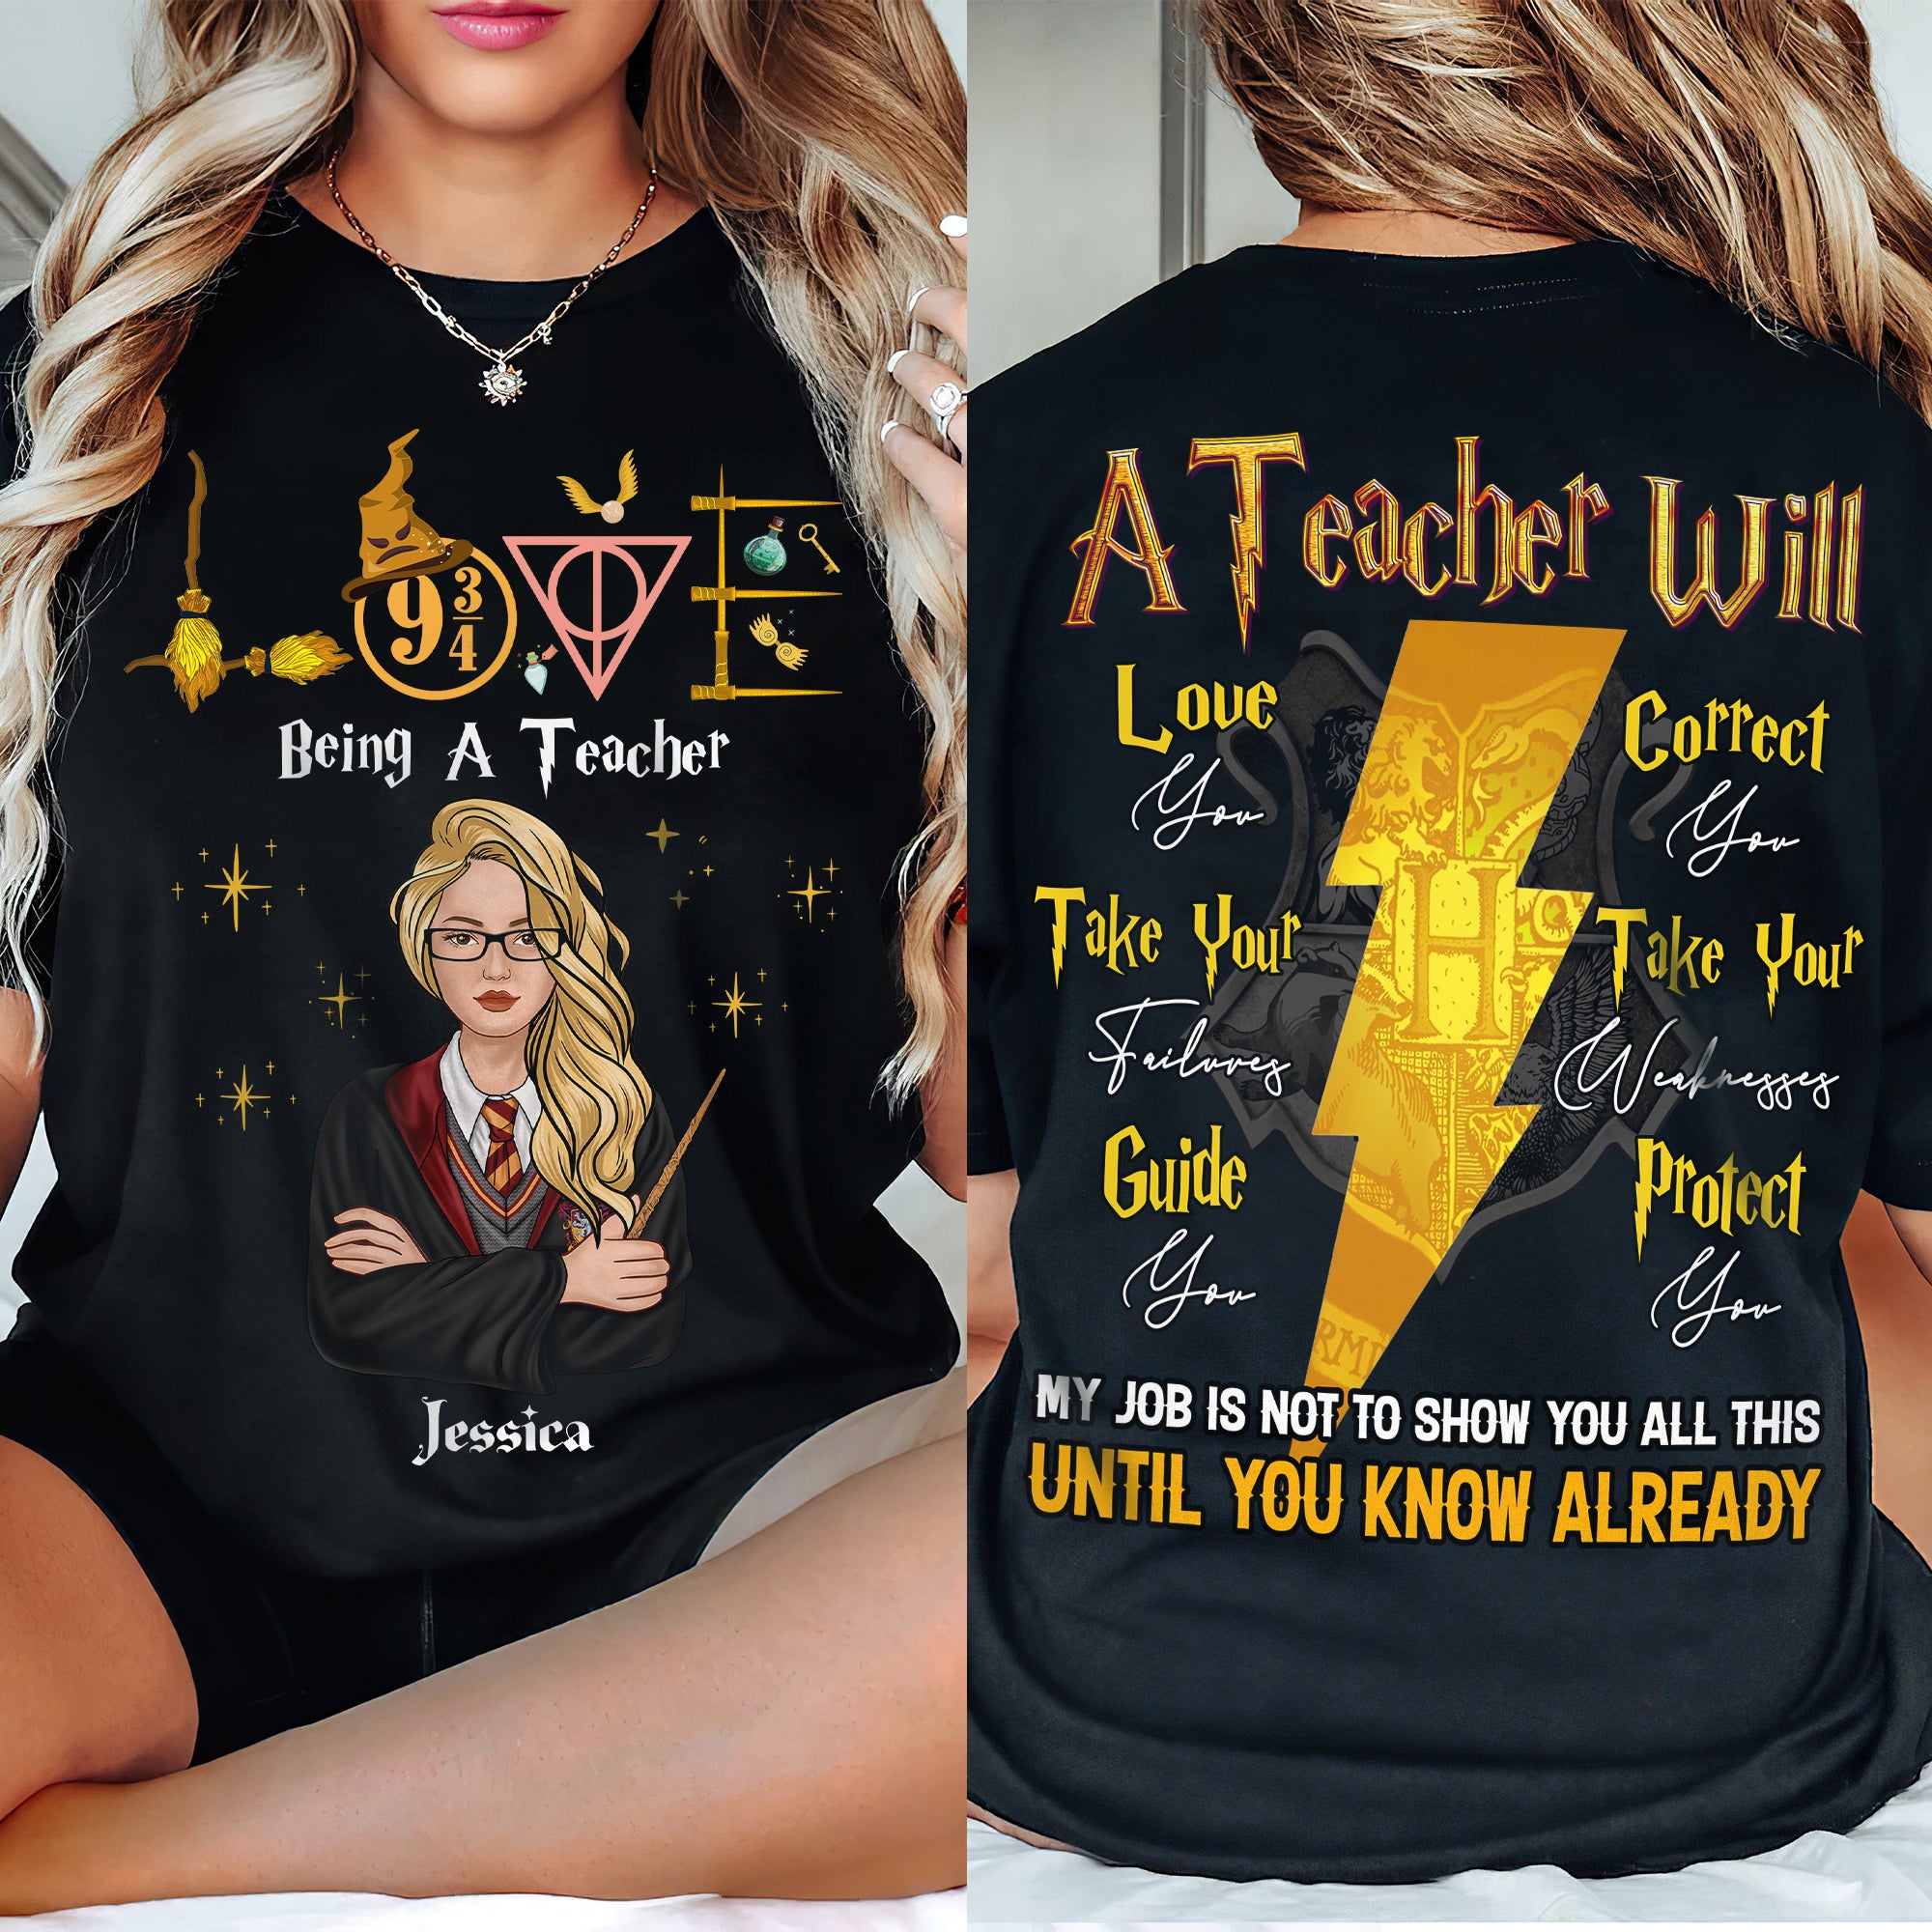 Personalized Gifts For Teacher Shirt 04ohti250624tm-Homacus